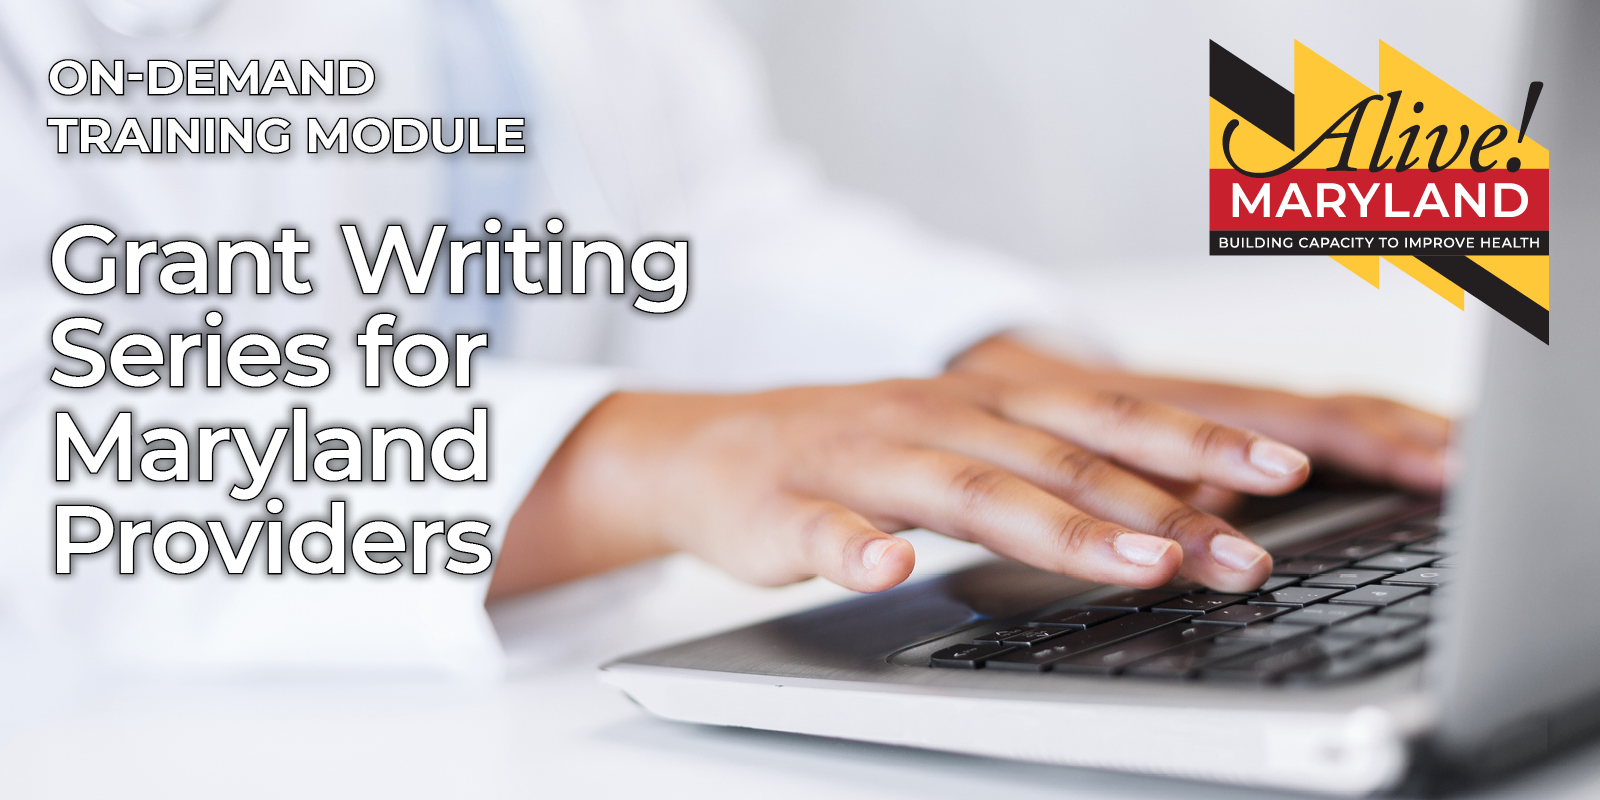 Grant Writing Series for Maryland Providers